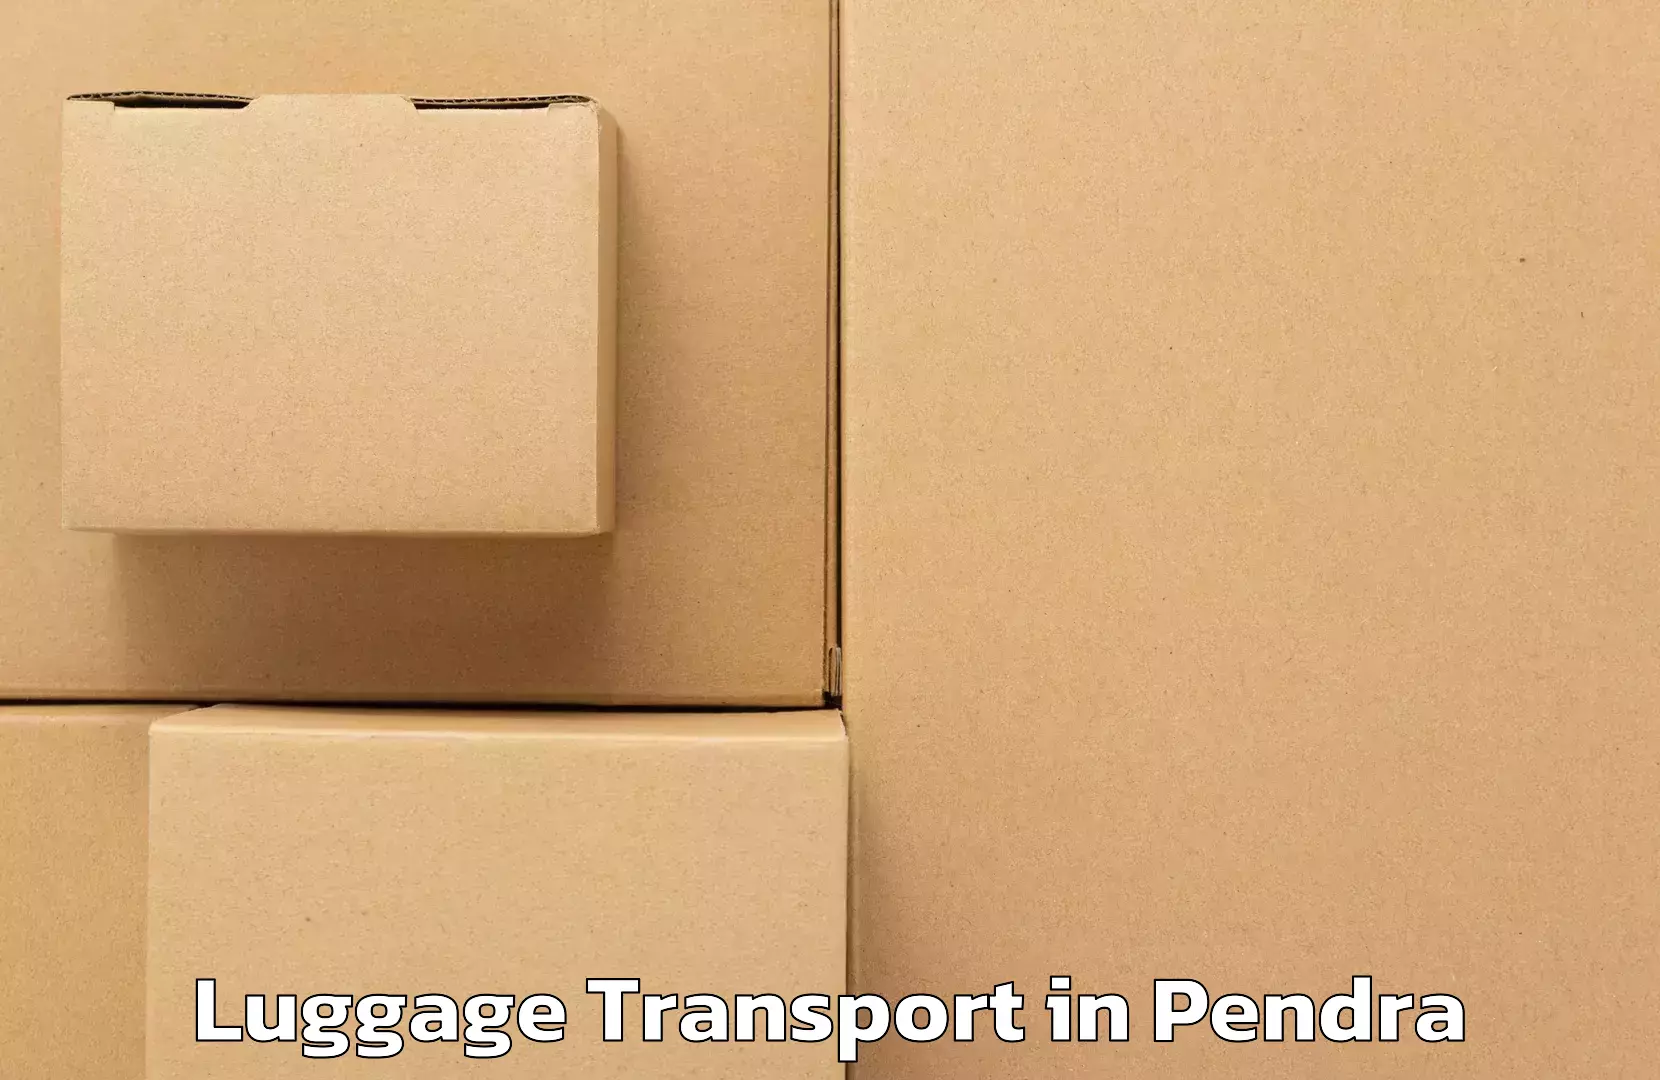 Automated luggage transport in Pendra